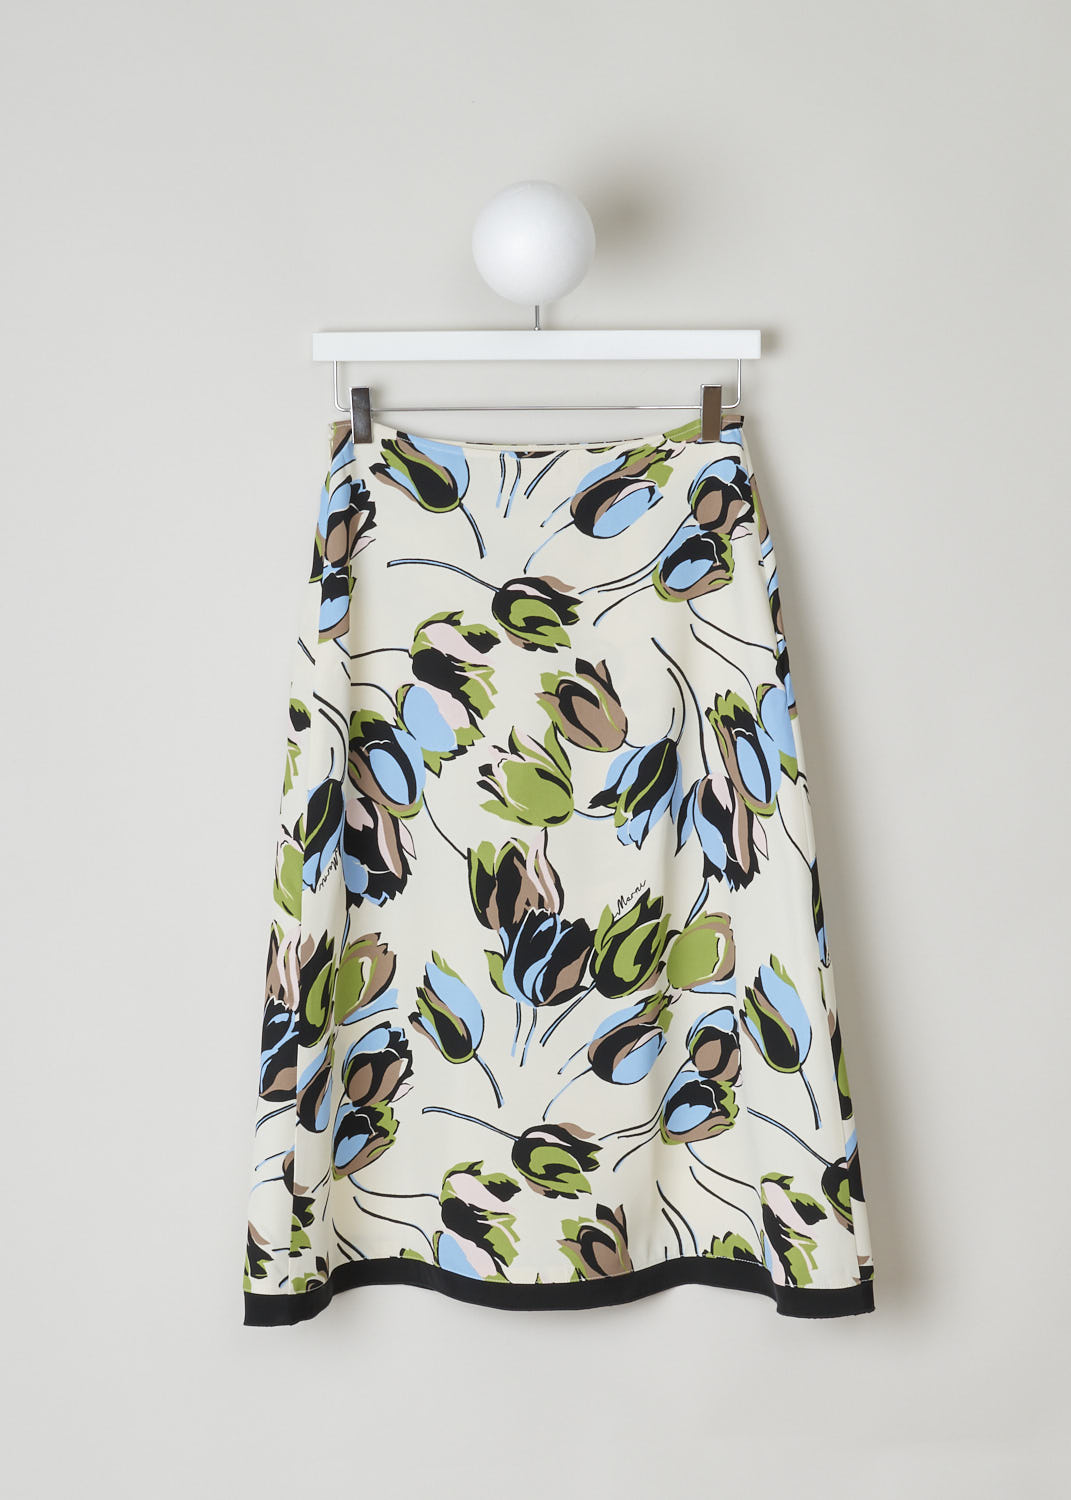 MARNI, CREAM COLORED A-LINE MIDI SKIRT, GOMA0042Q0_UTV844_WIW03, Print, Back, This cream colored A-line skirt has a floral print in blues and greens. A concealed side zip functions as the closing option. The skirt has a black satin hemline. 
